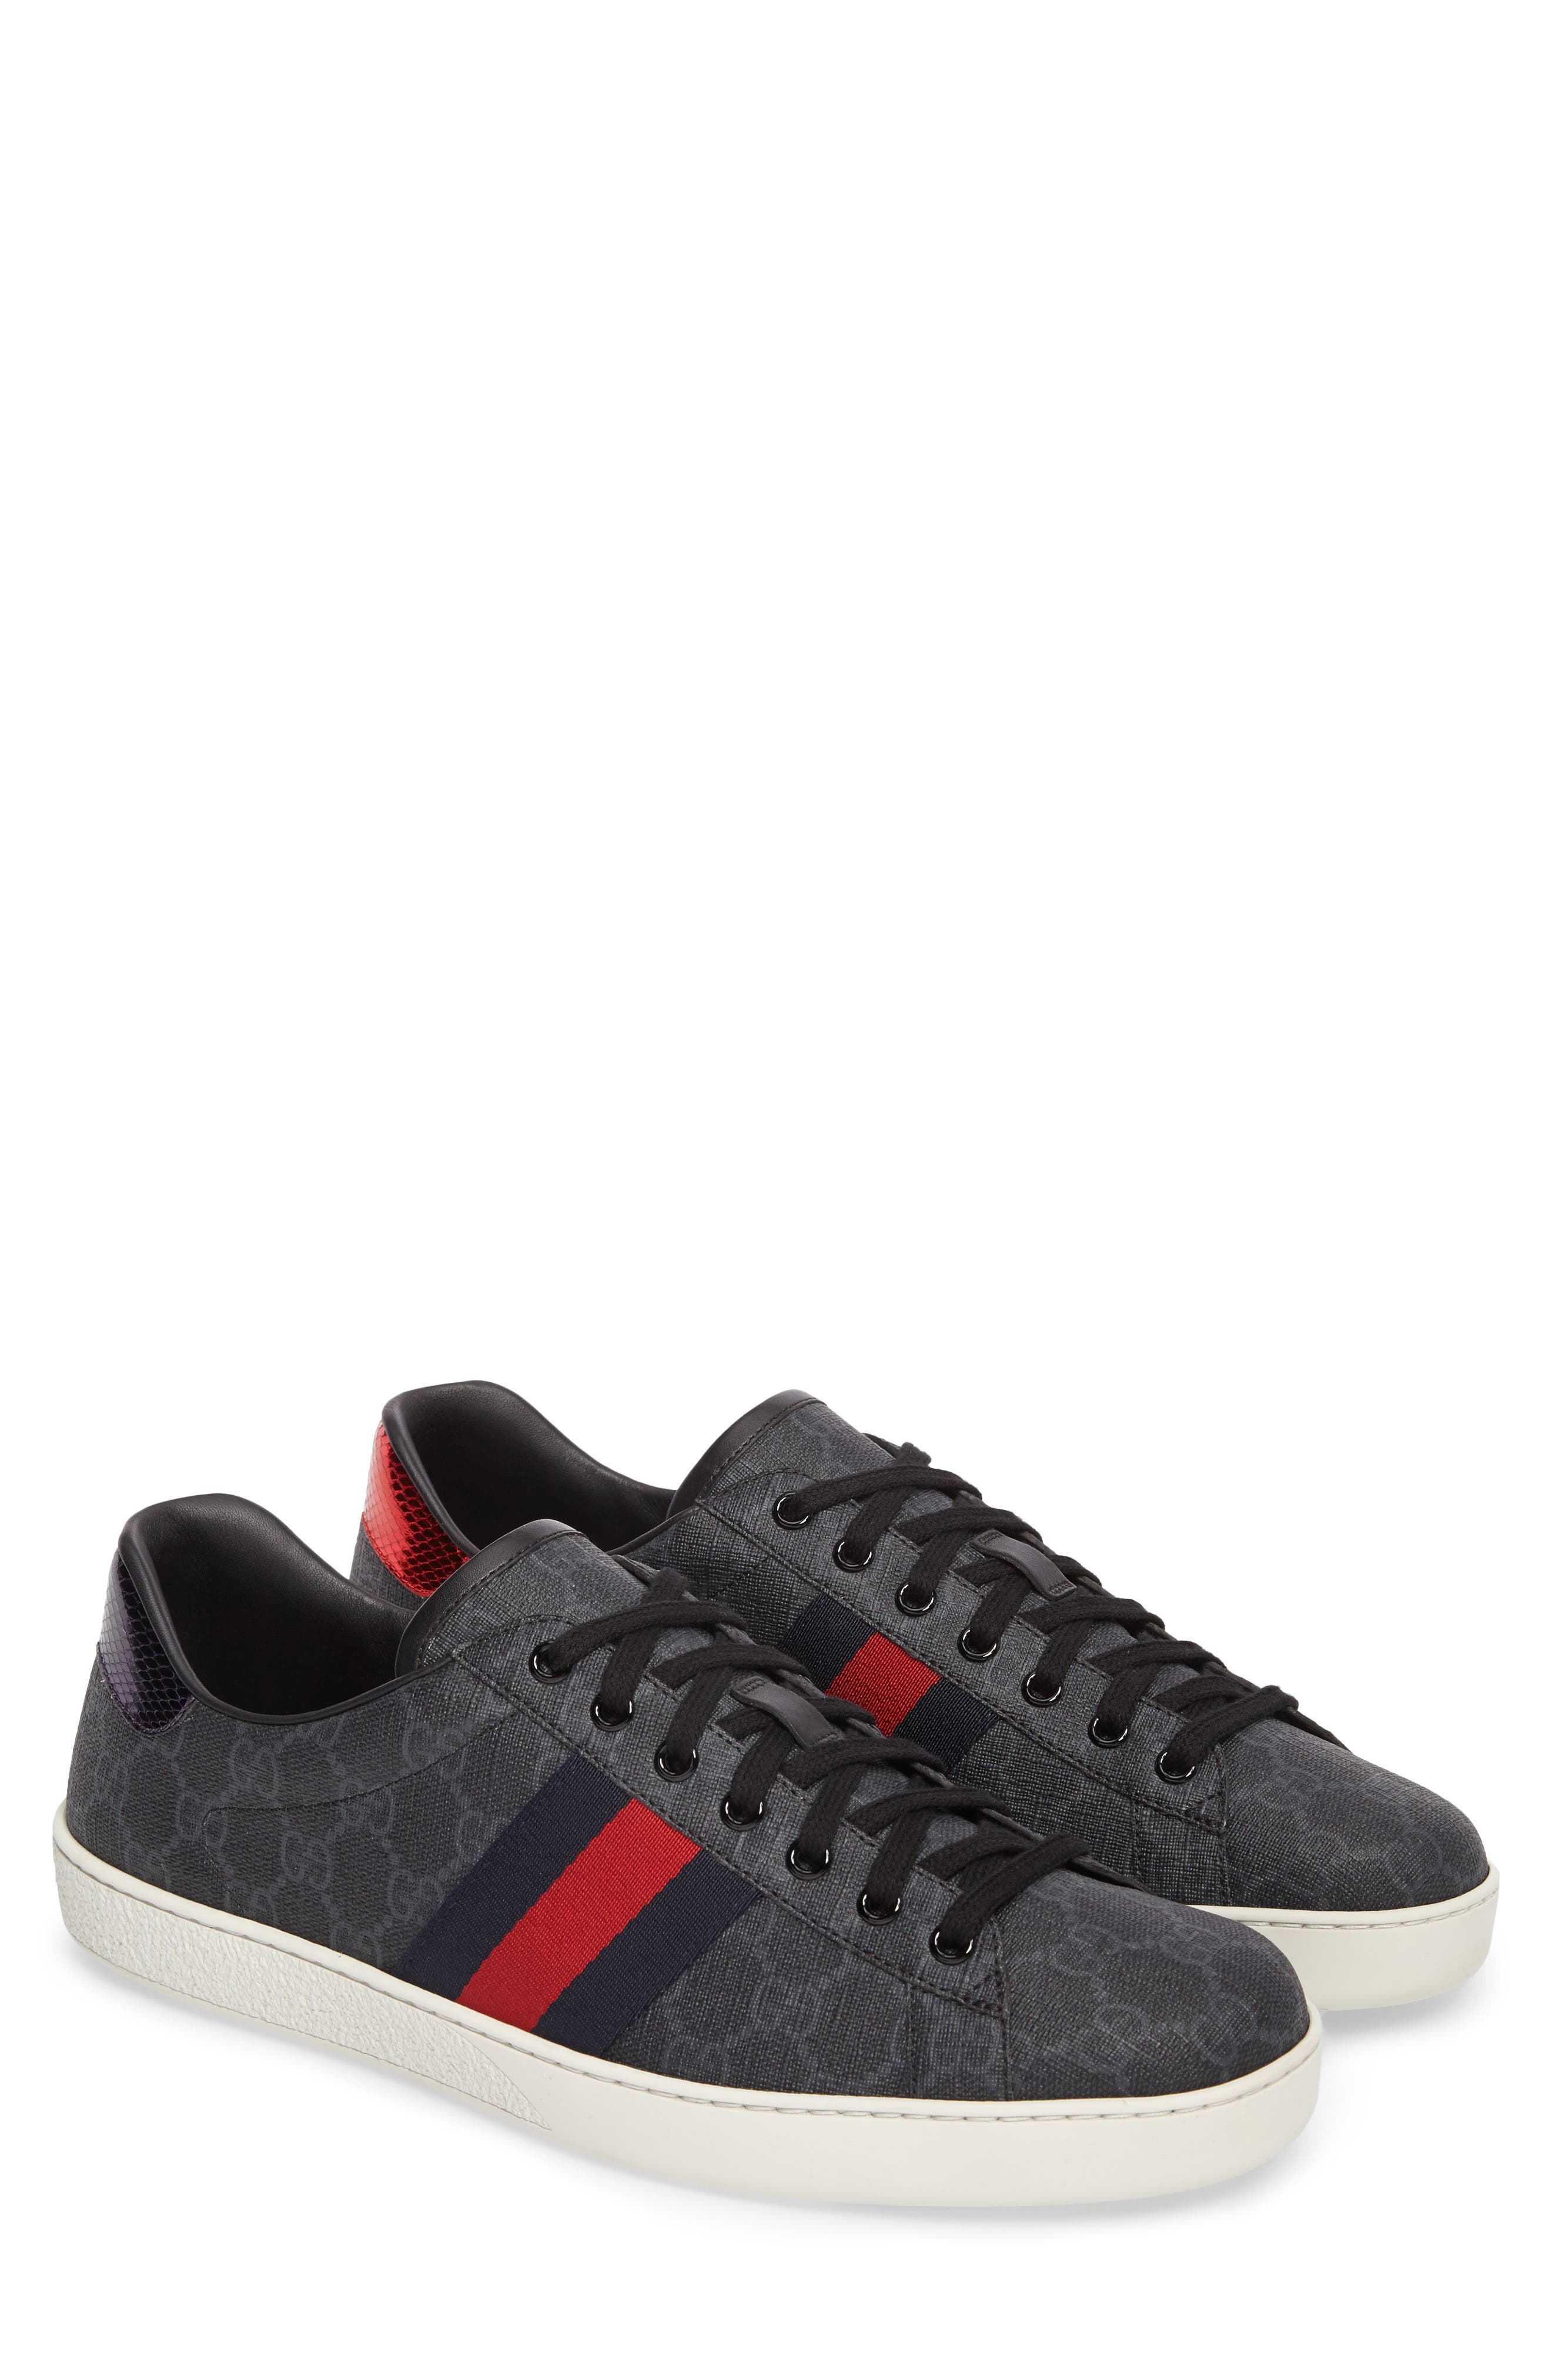 gucci low top sneakers